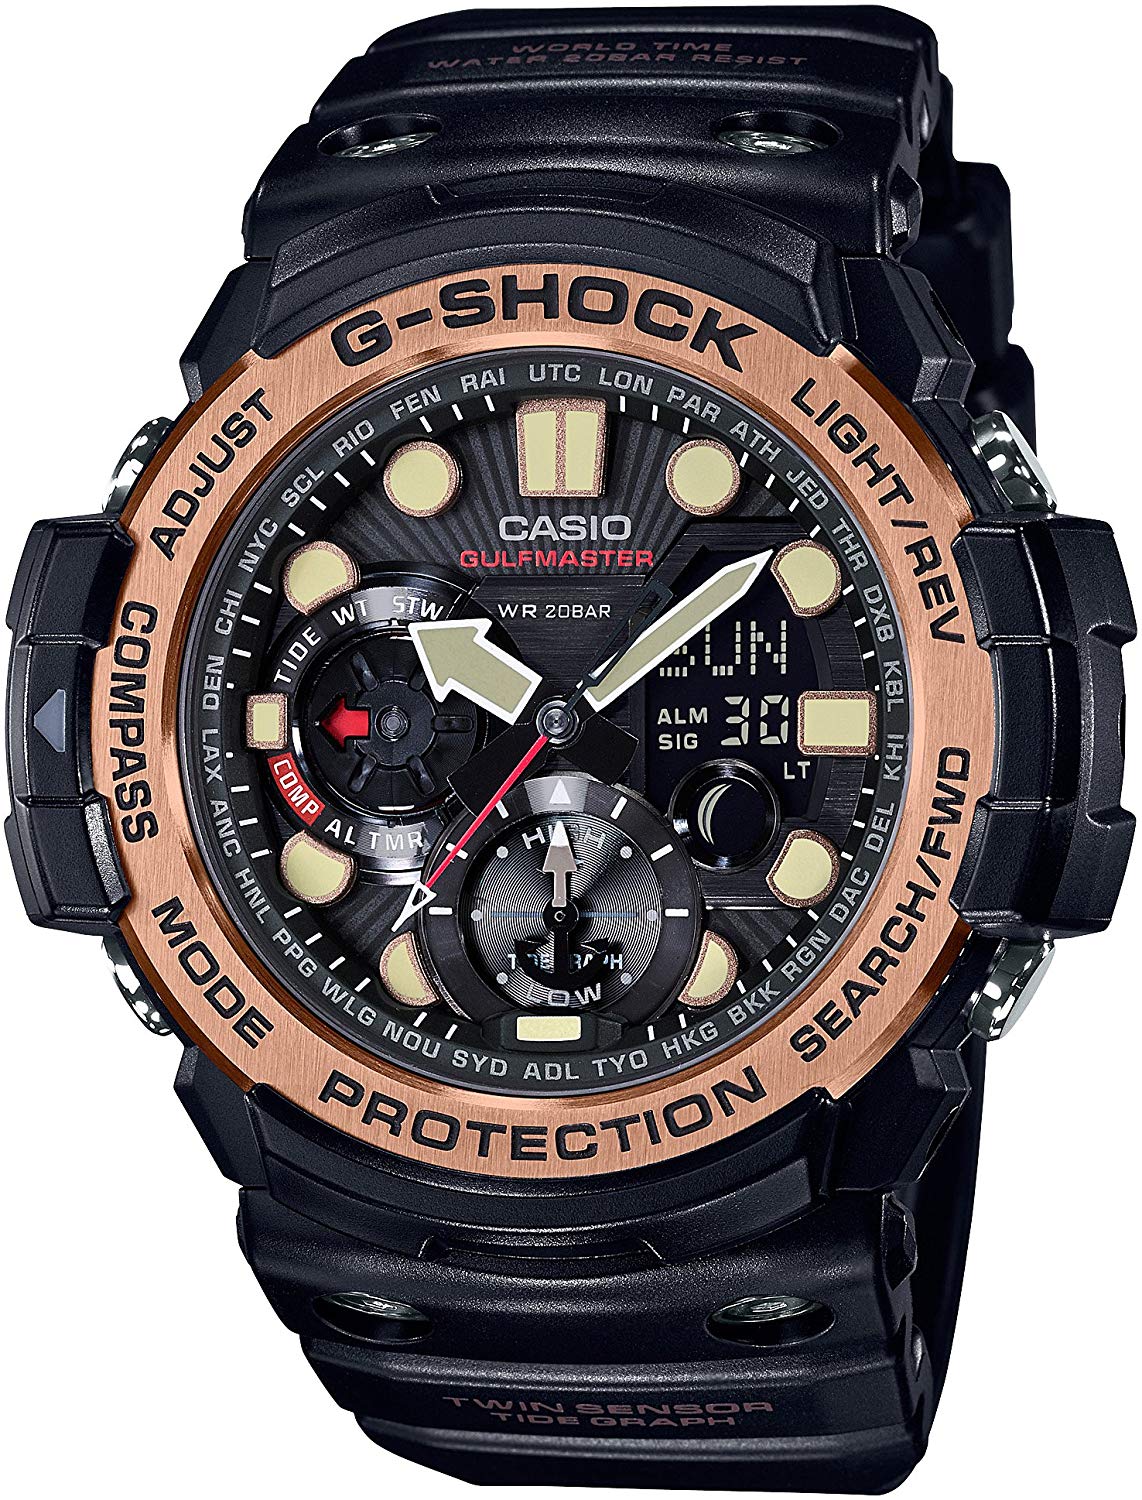 CASIO G-SHOCK GULFMASTER GN-1000RG-1AJF Black Discovery Japan Mall